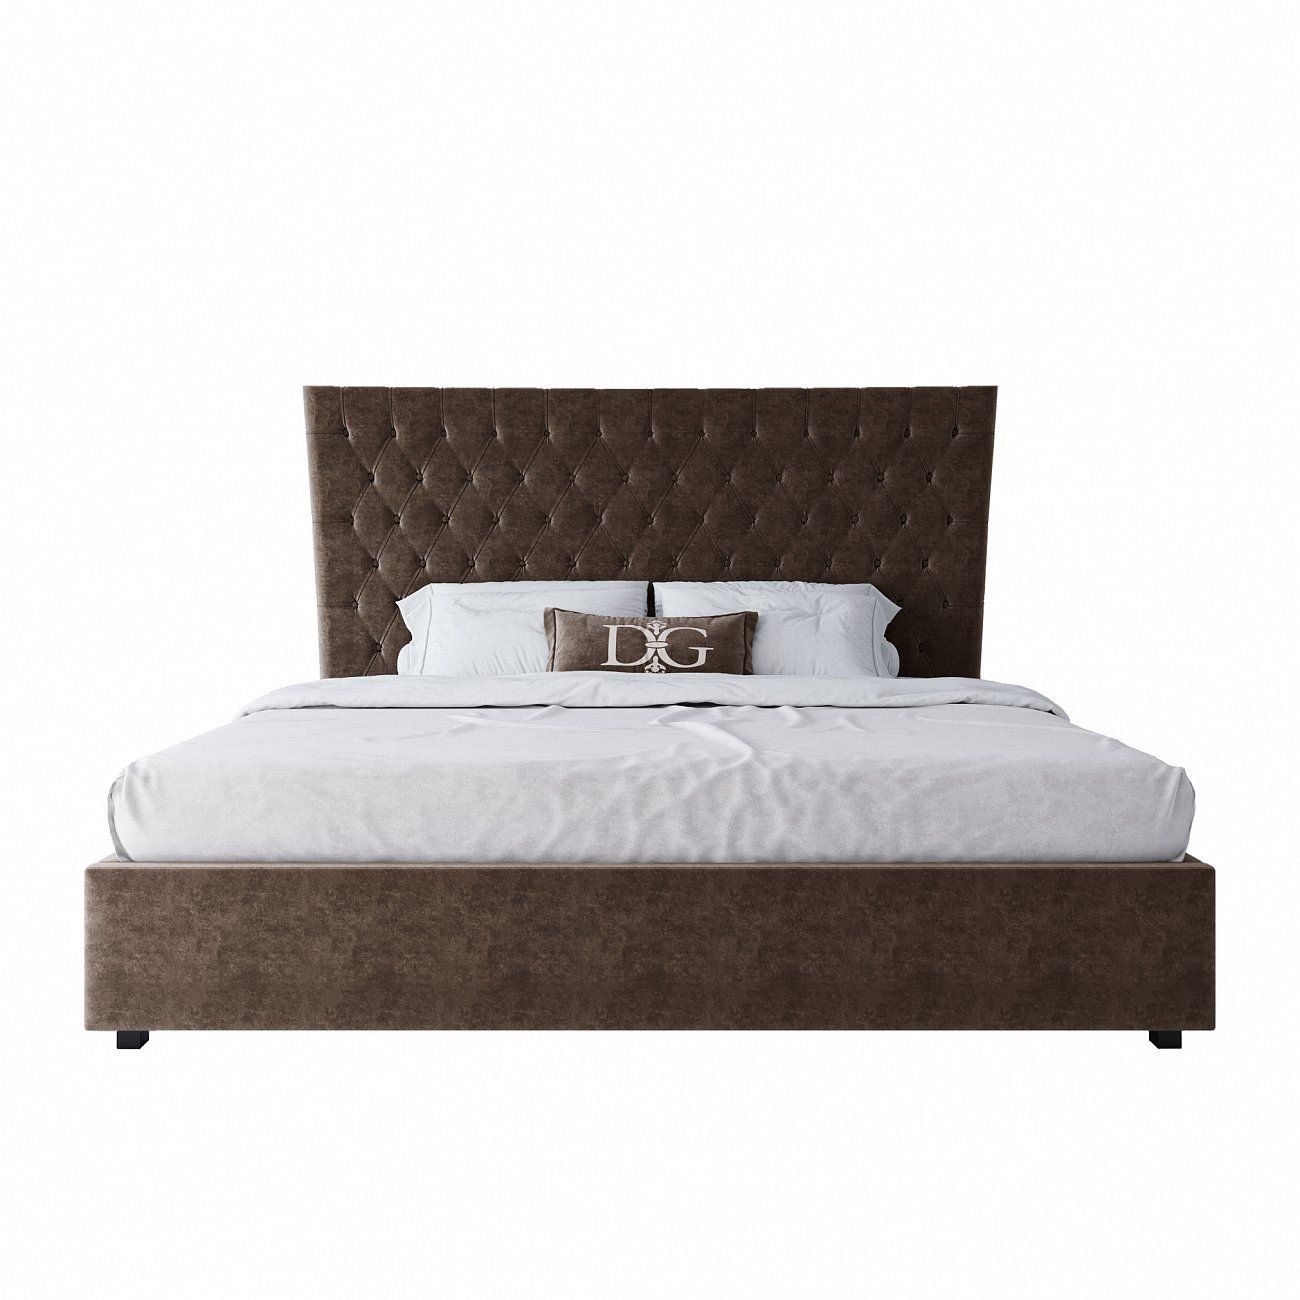 Euro bed 200x200 cm brown QuickSand